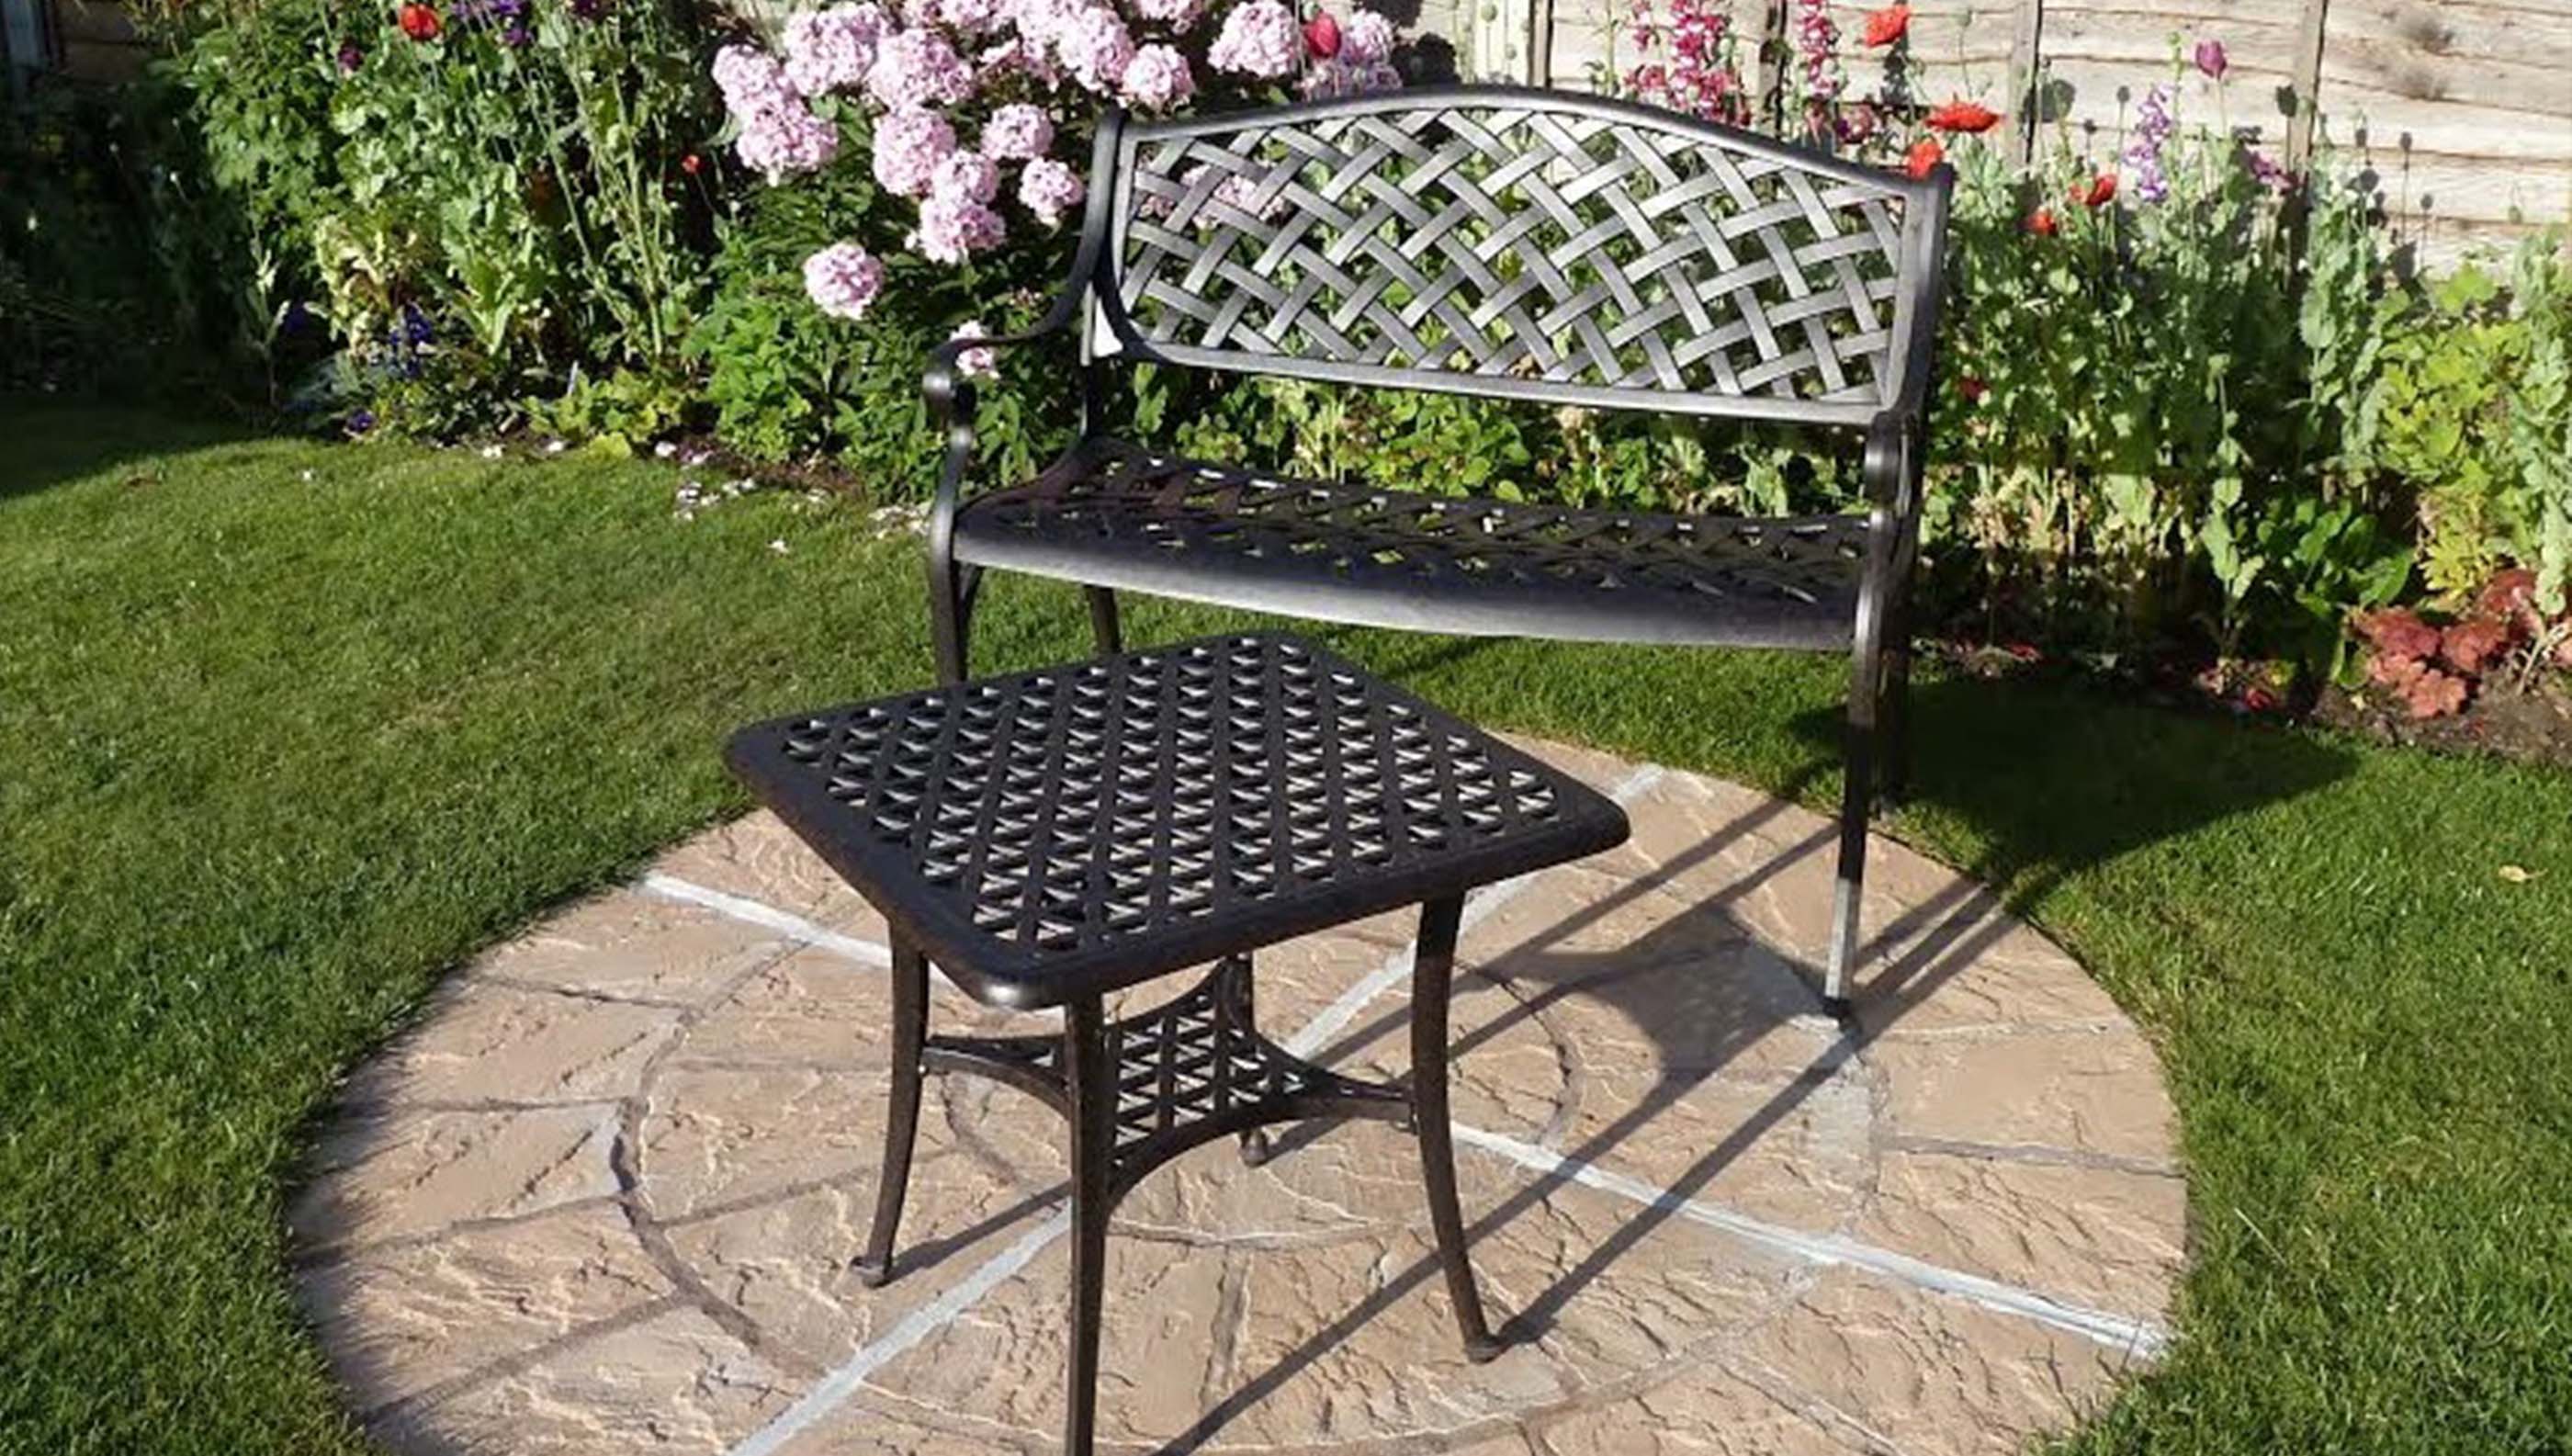 How To Oil Garden Furniture Lazy Susan, Best Way To Apply Outdoor Furniture Oil